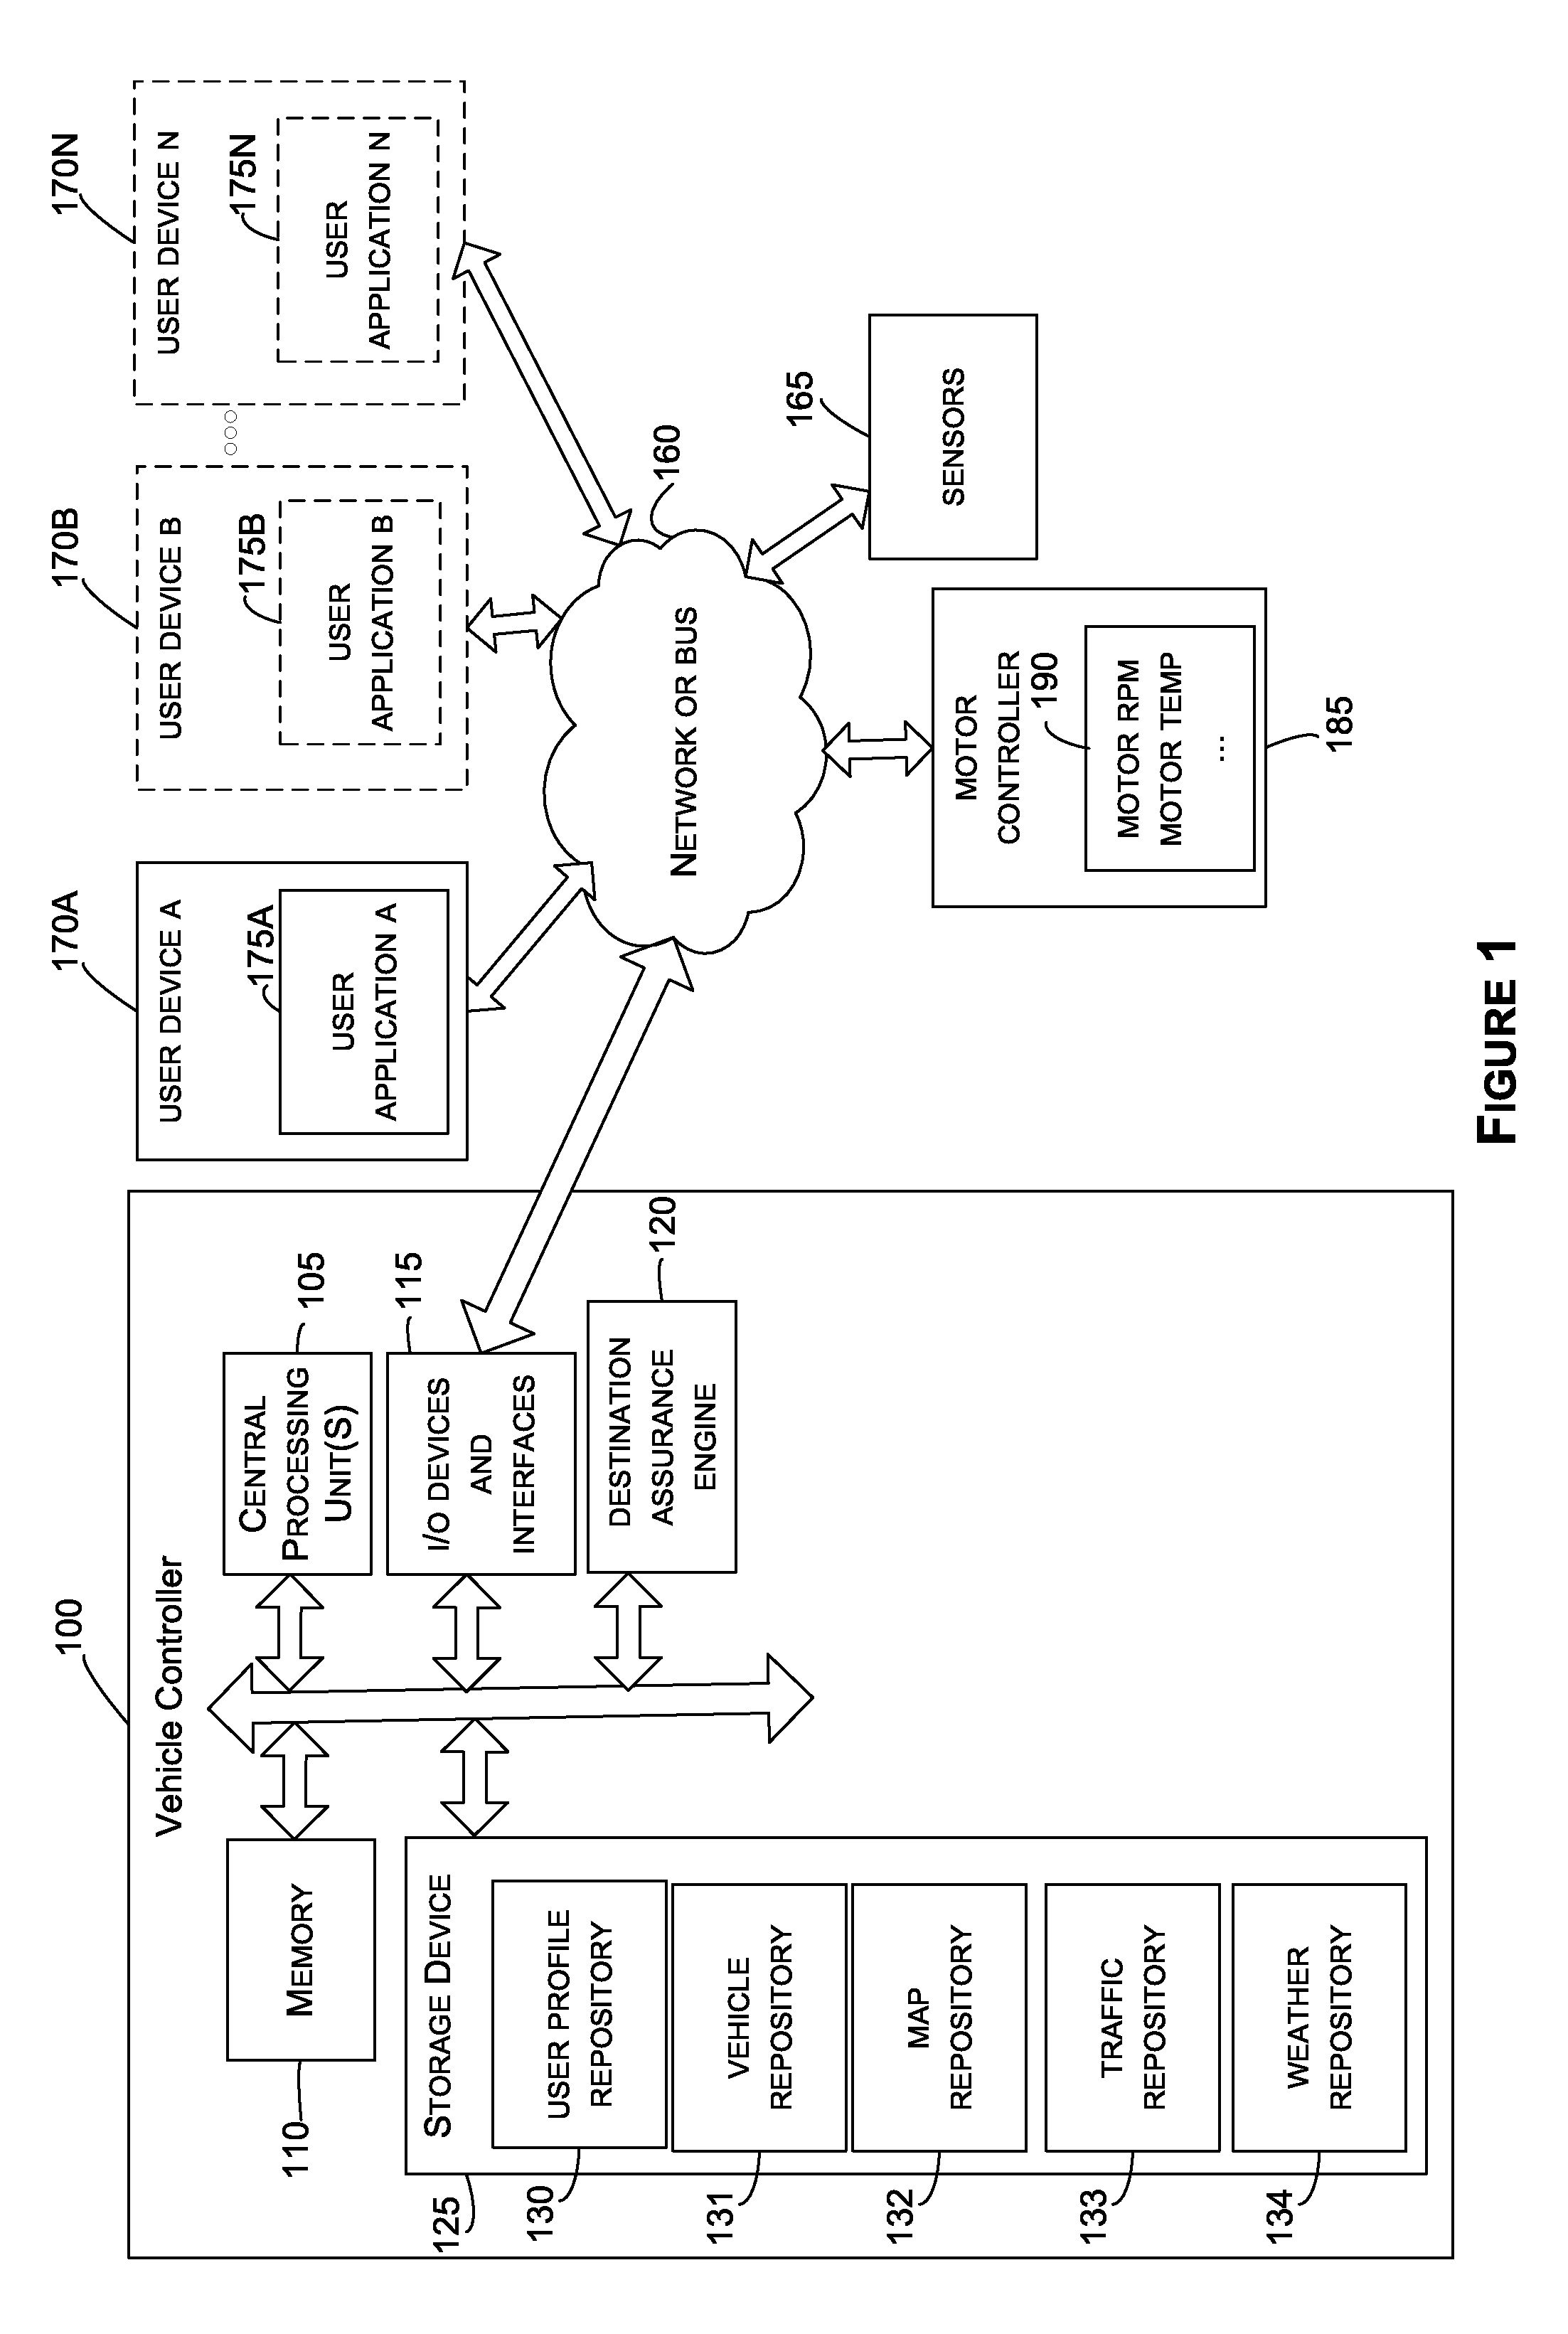 Vehicle control system and methods